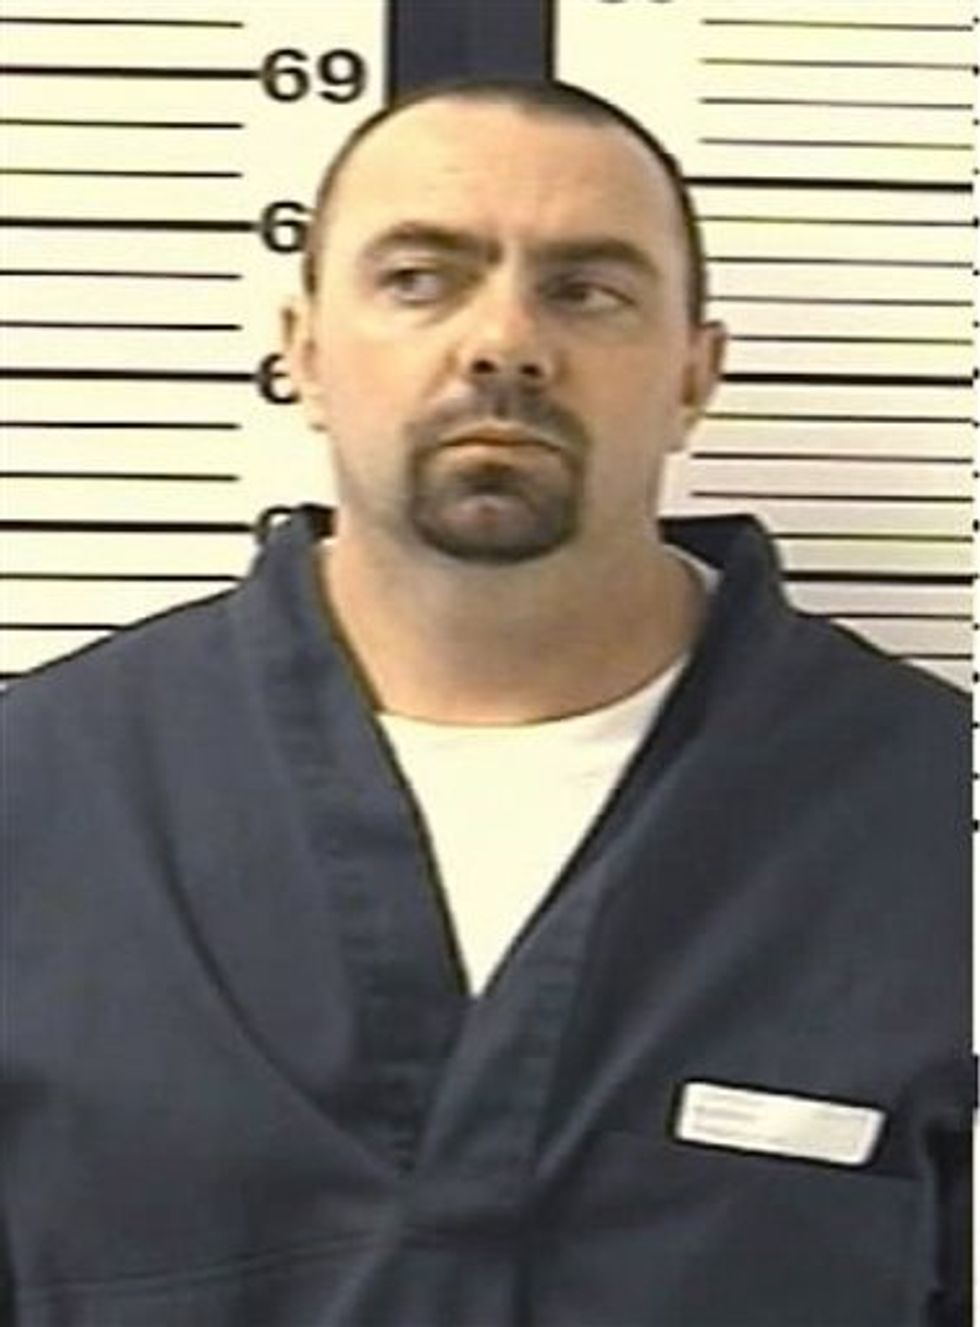 Man Accused in 'NAACP Bombing' Was Actually Targeting His Accountant's Office: Authorities